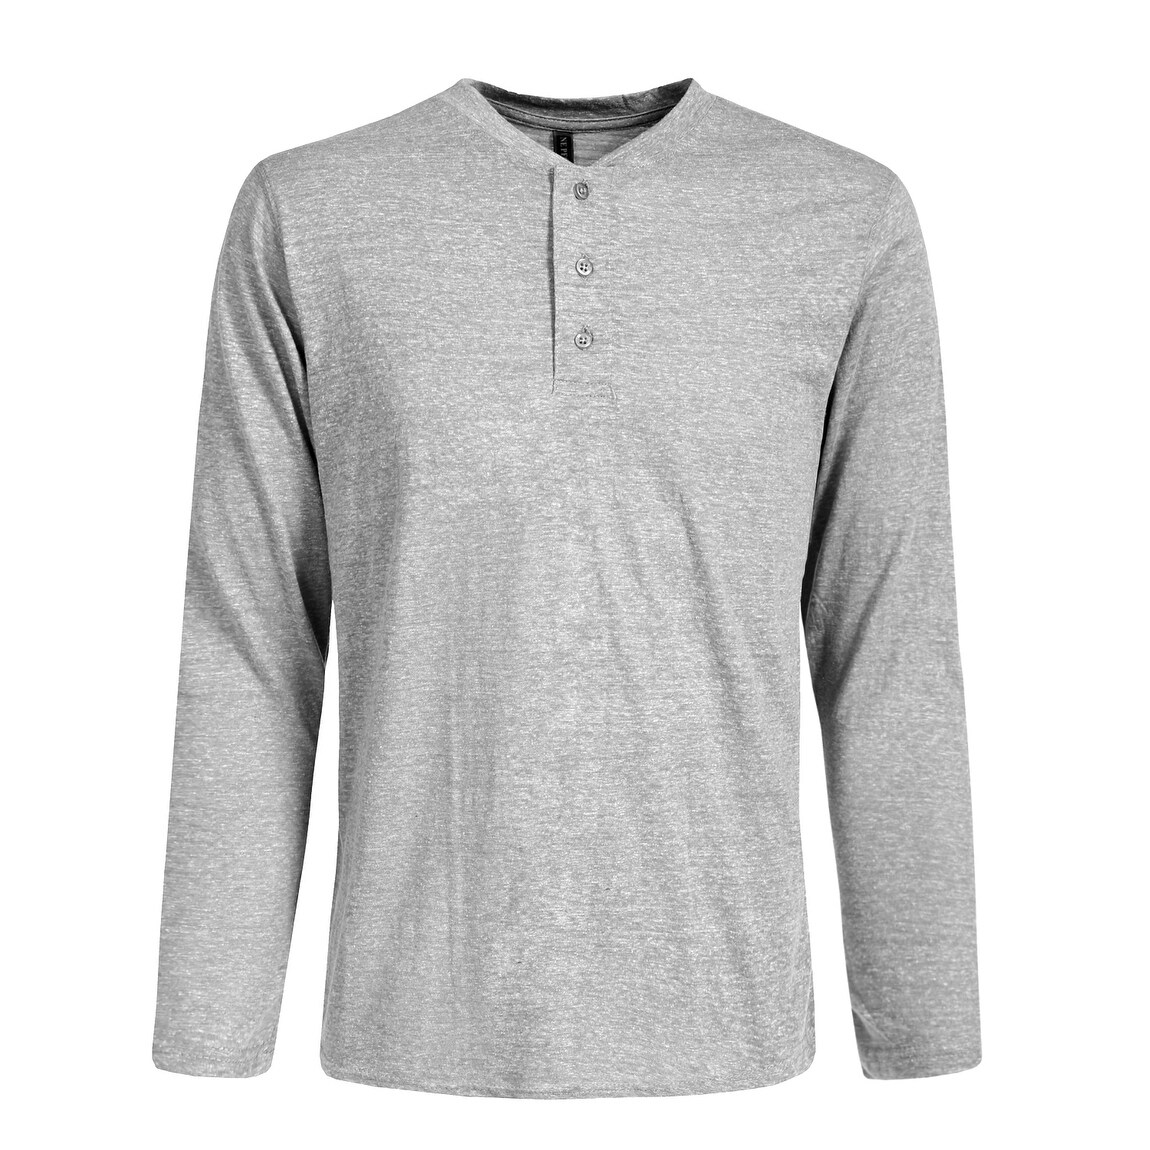 Buy > henley button shirt > in stock